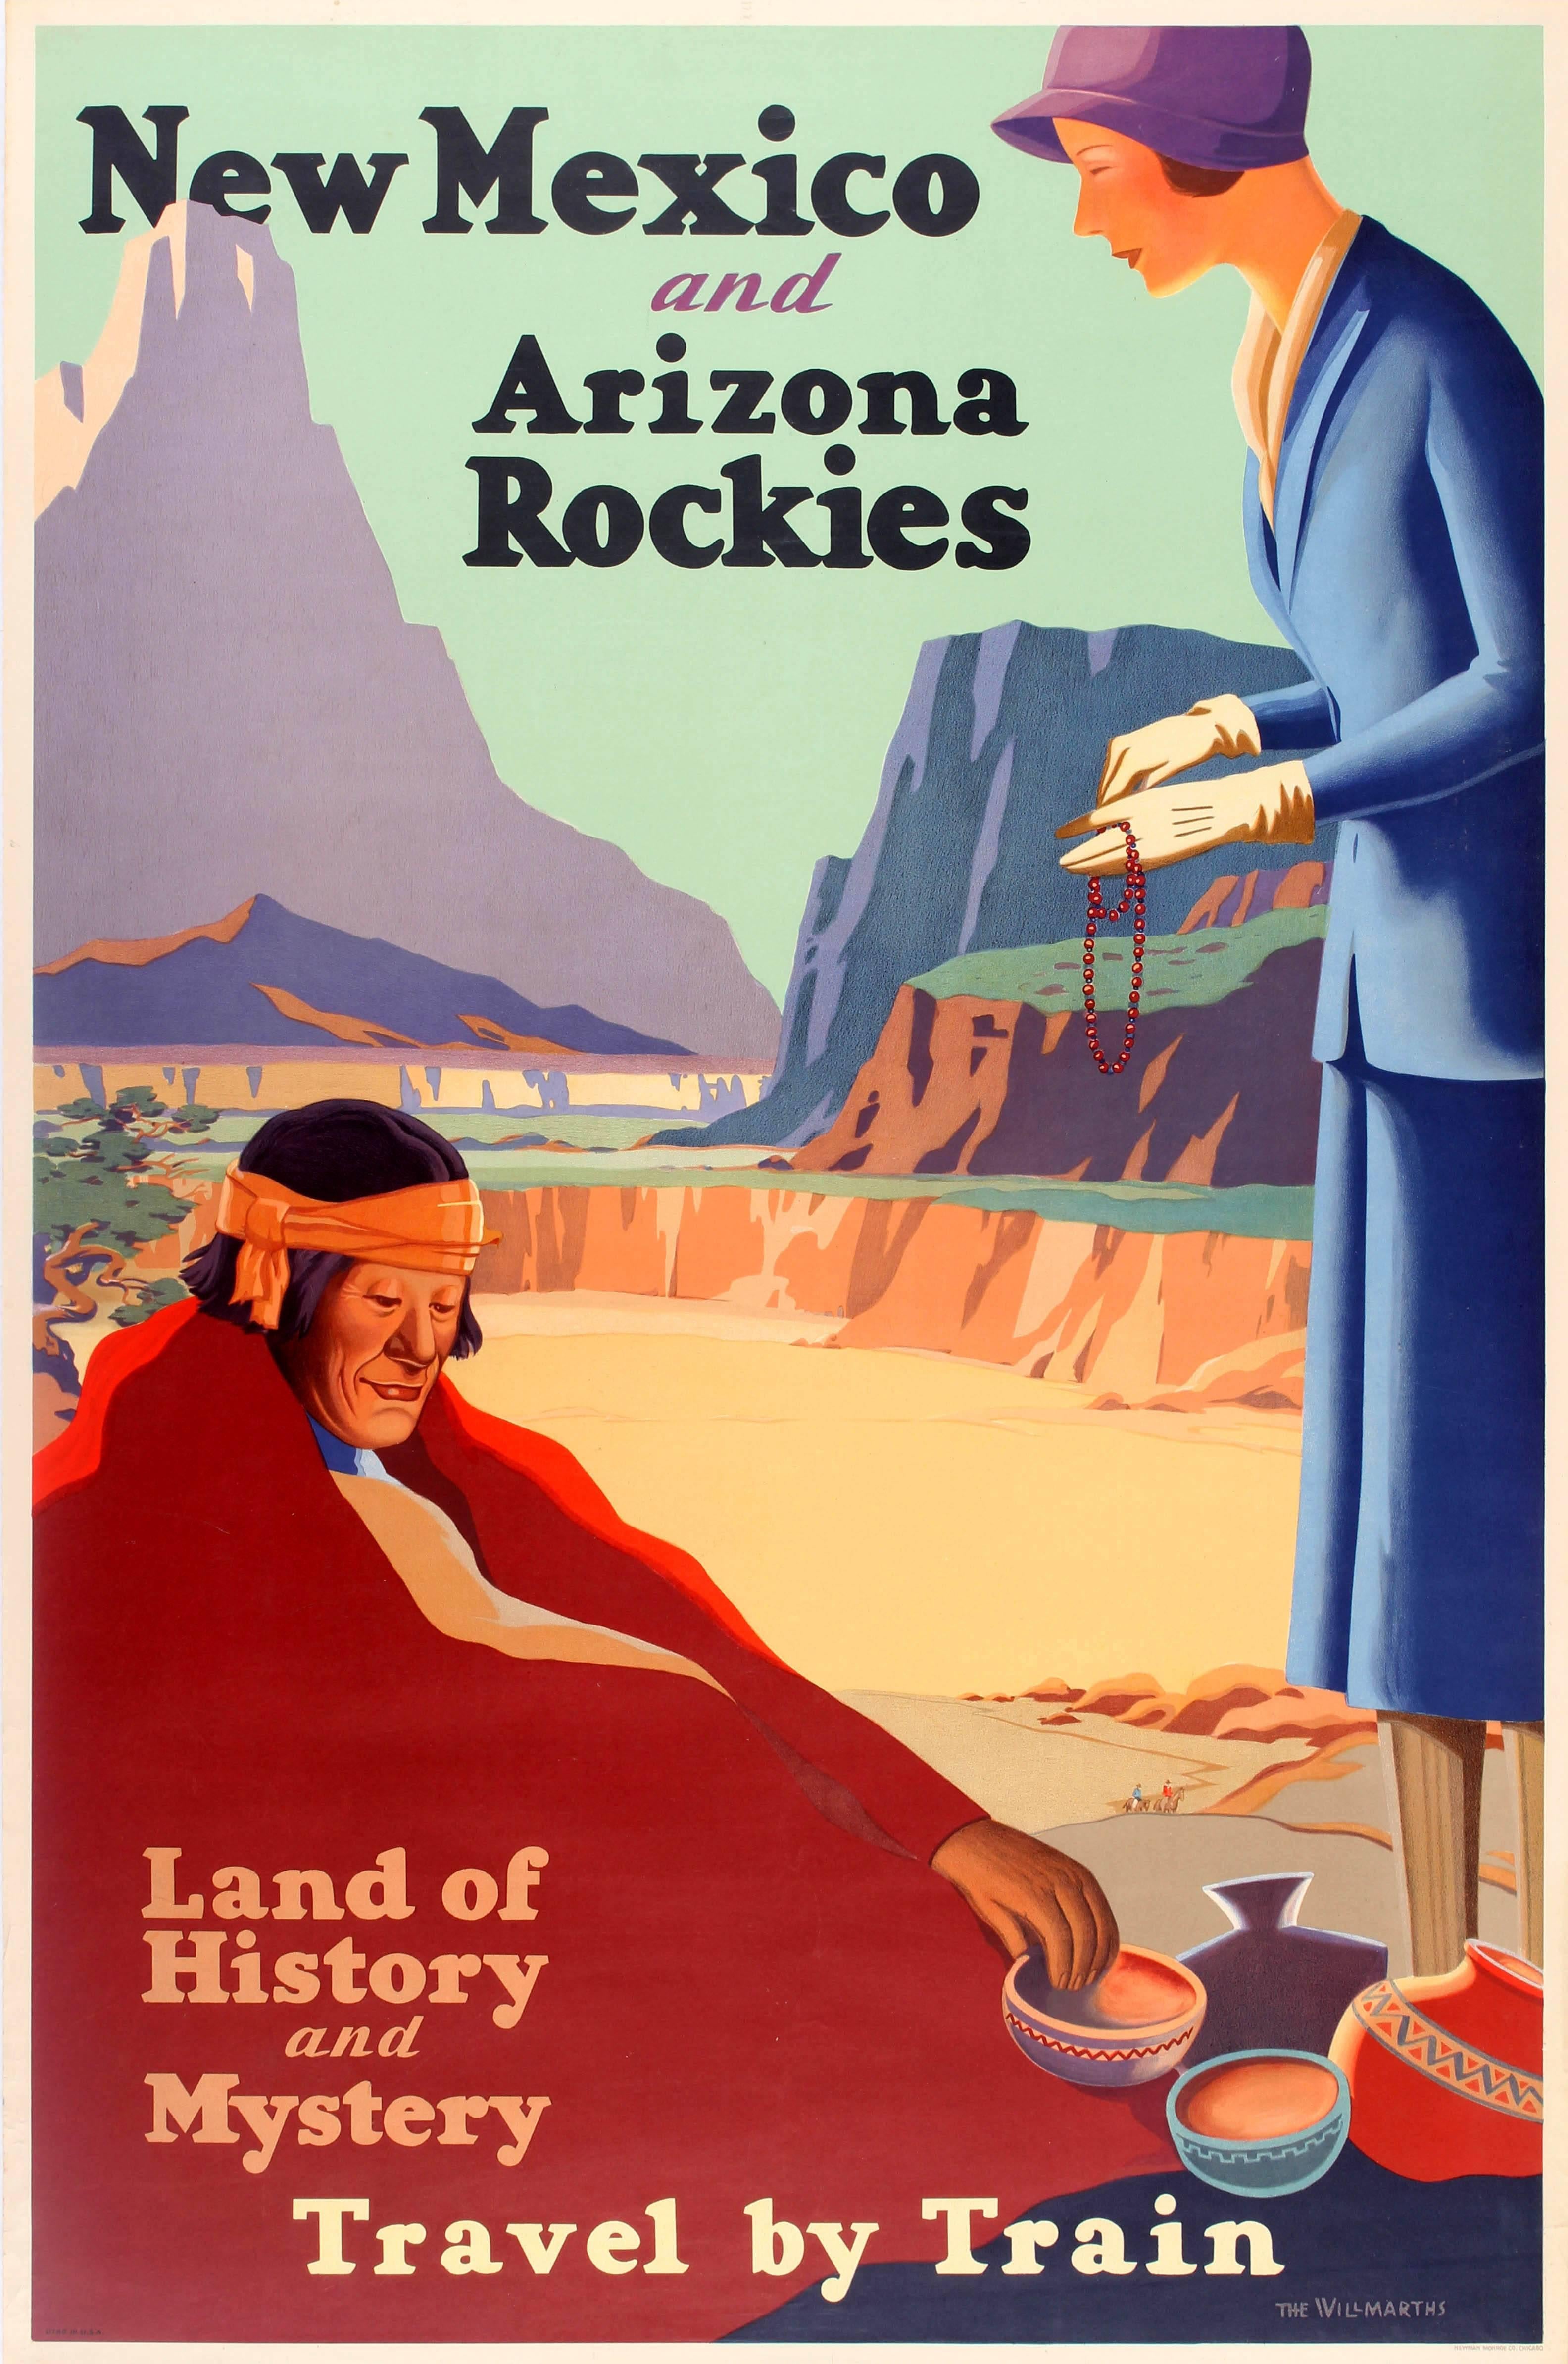 Original 1920s Travel Poster Advertising New Mexico And Arizona Rockies By Train